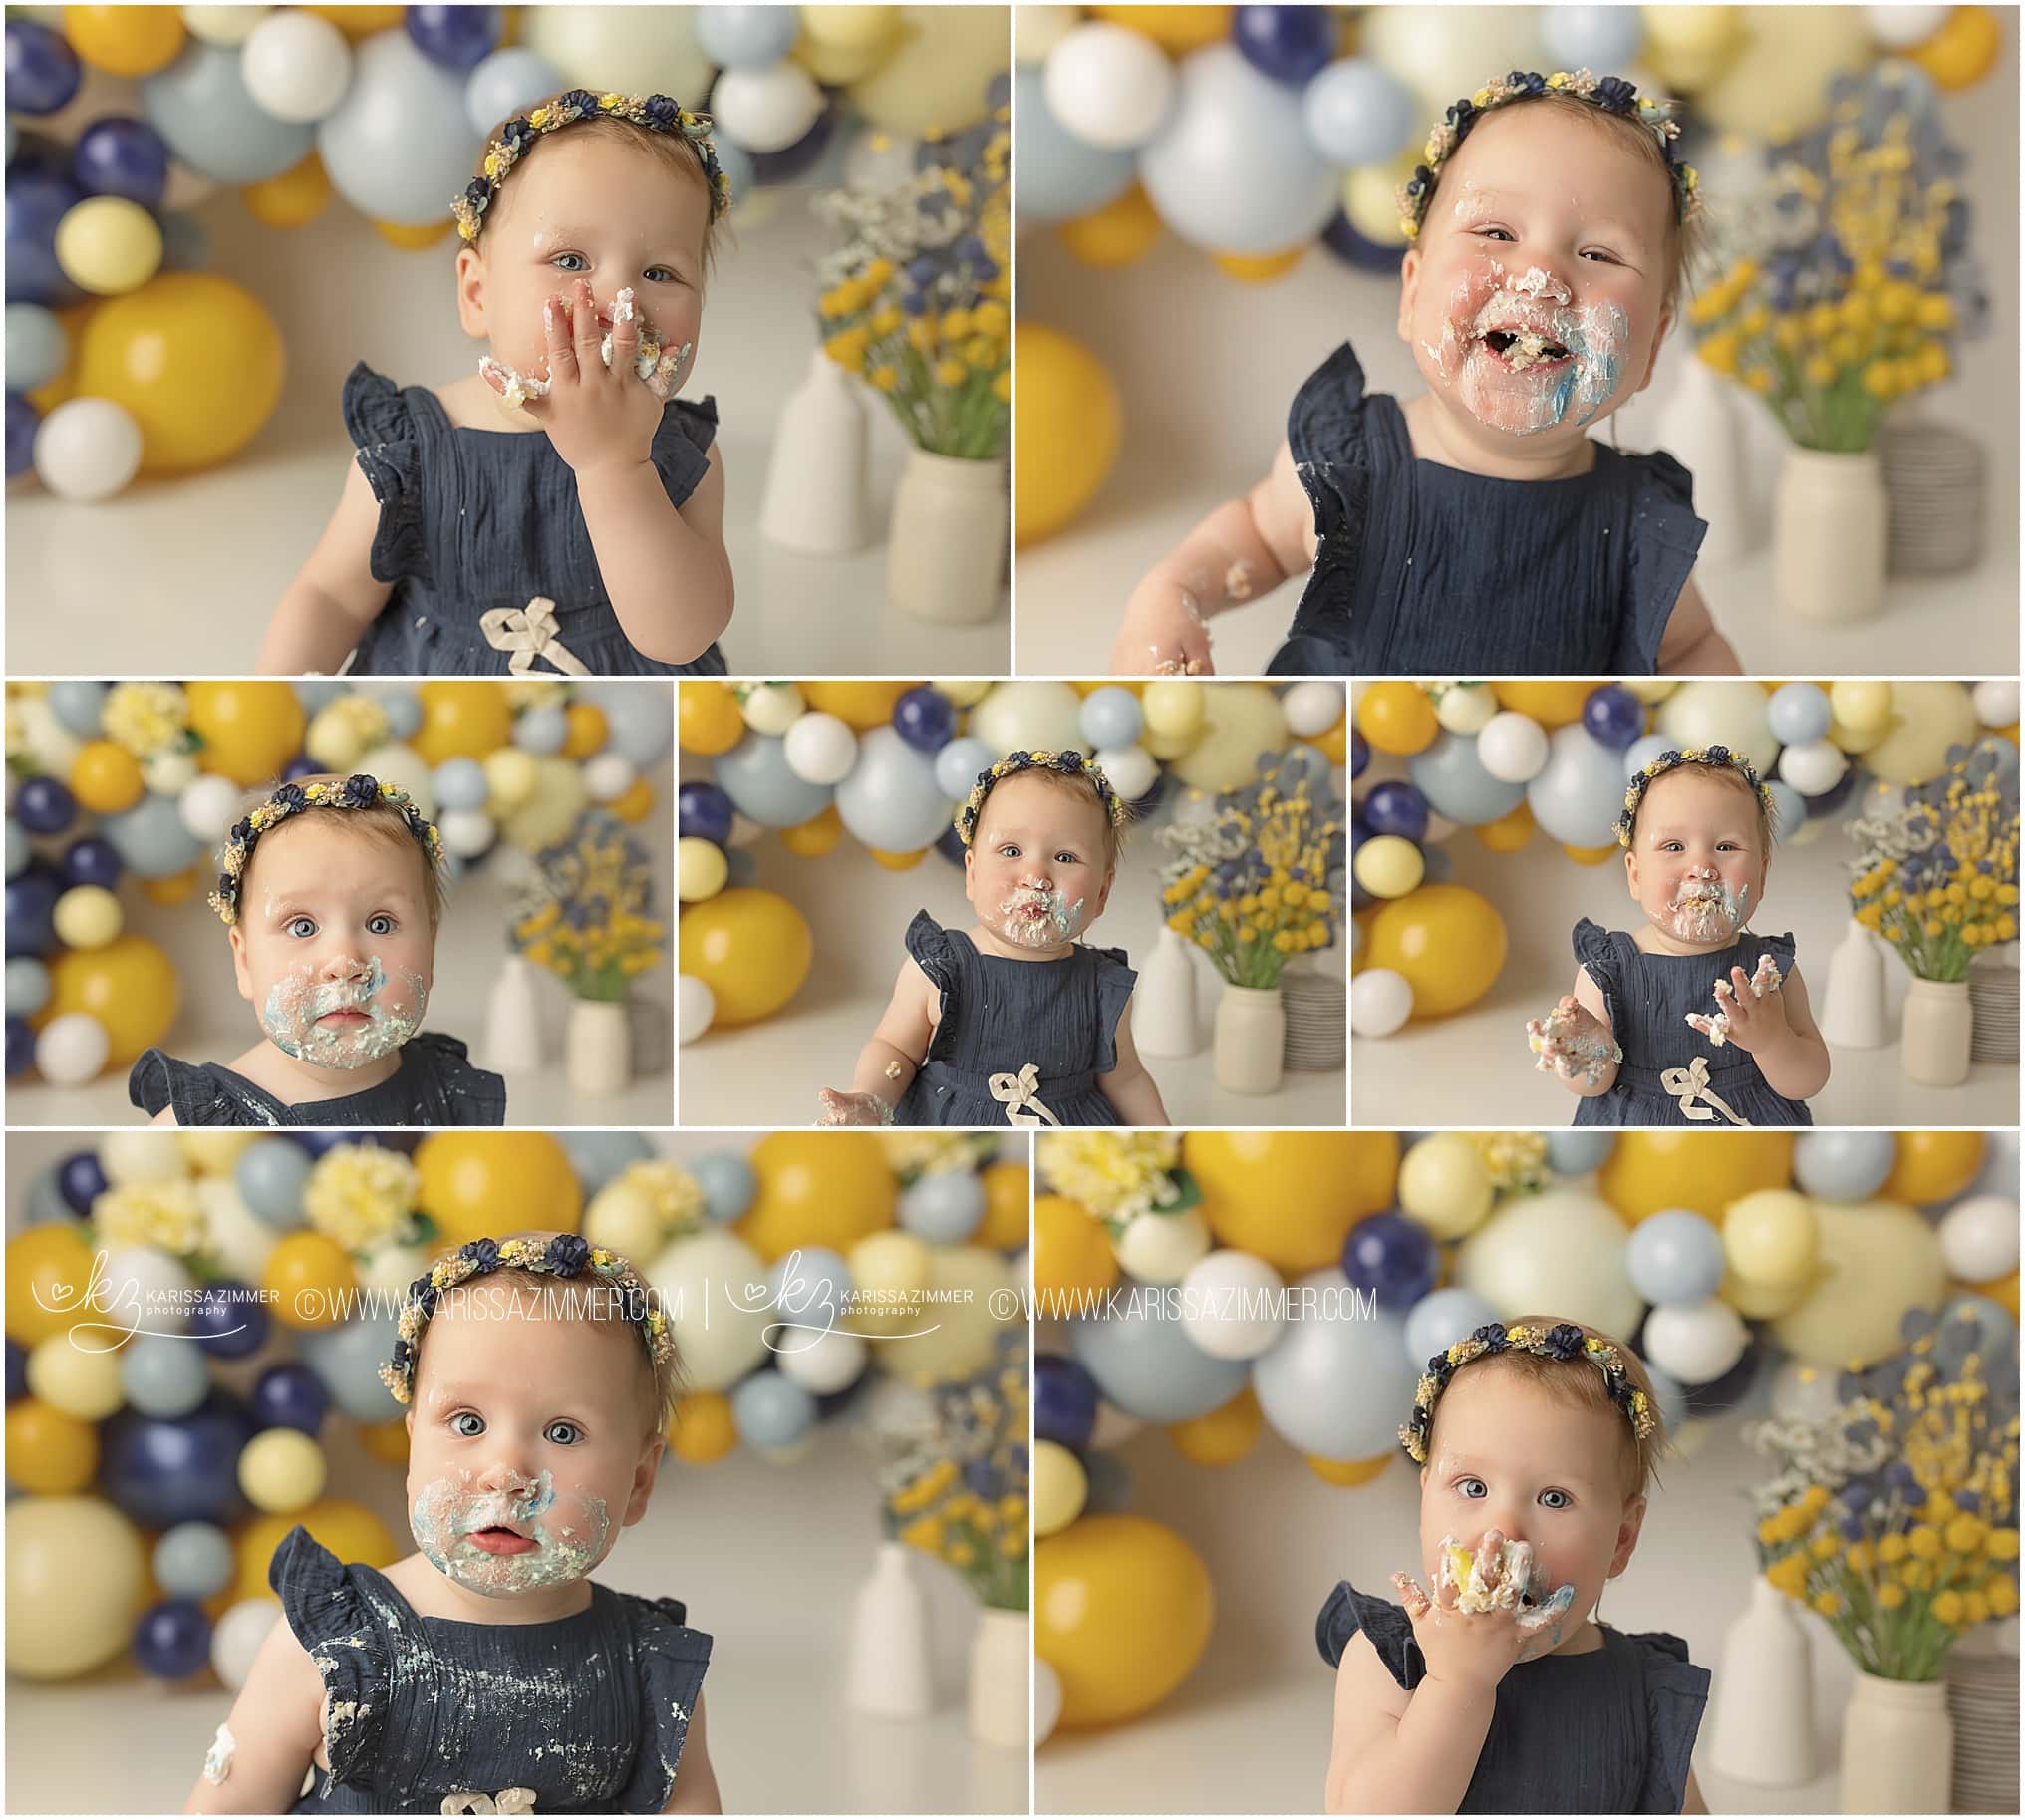 Baby eats cake at First Birthday Cake Smash Photography session